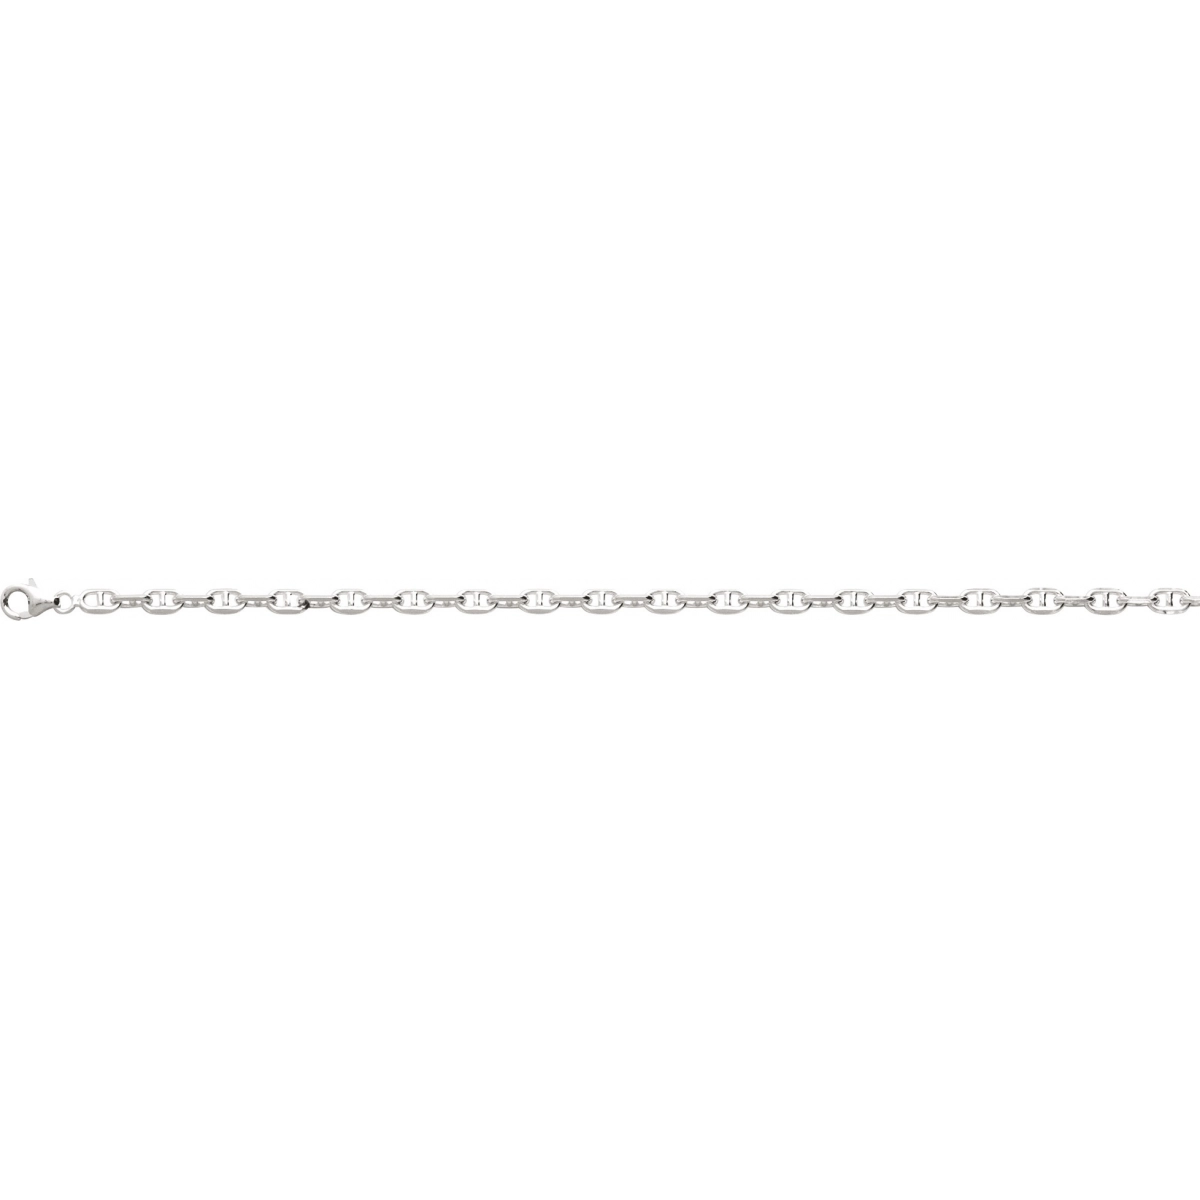 Necklace 'anchor link chain' rh925 Silver - Size: 50  Lua Blanca  301182C.50